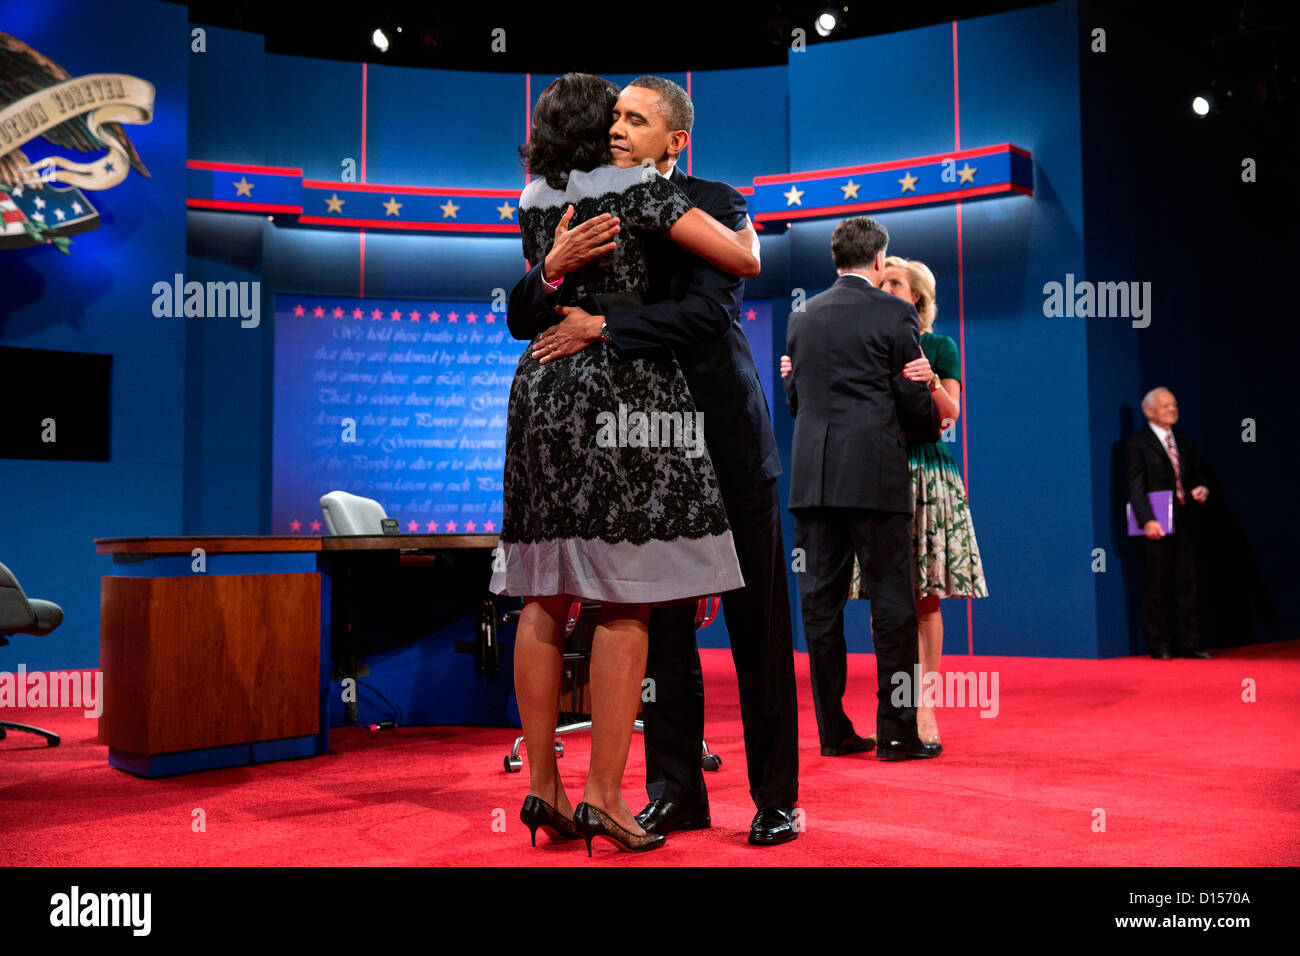 US President Barack Obama hugs First Lady Michelle Obama following the third presidential debate with Gov. Mitt Romney at Lynn University October 22, 2012 in Boca Raton, FL. Stock Photo